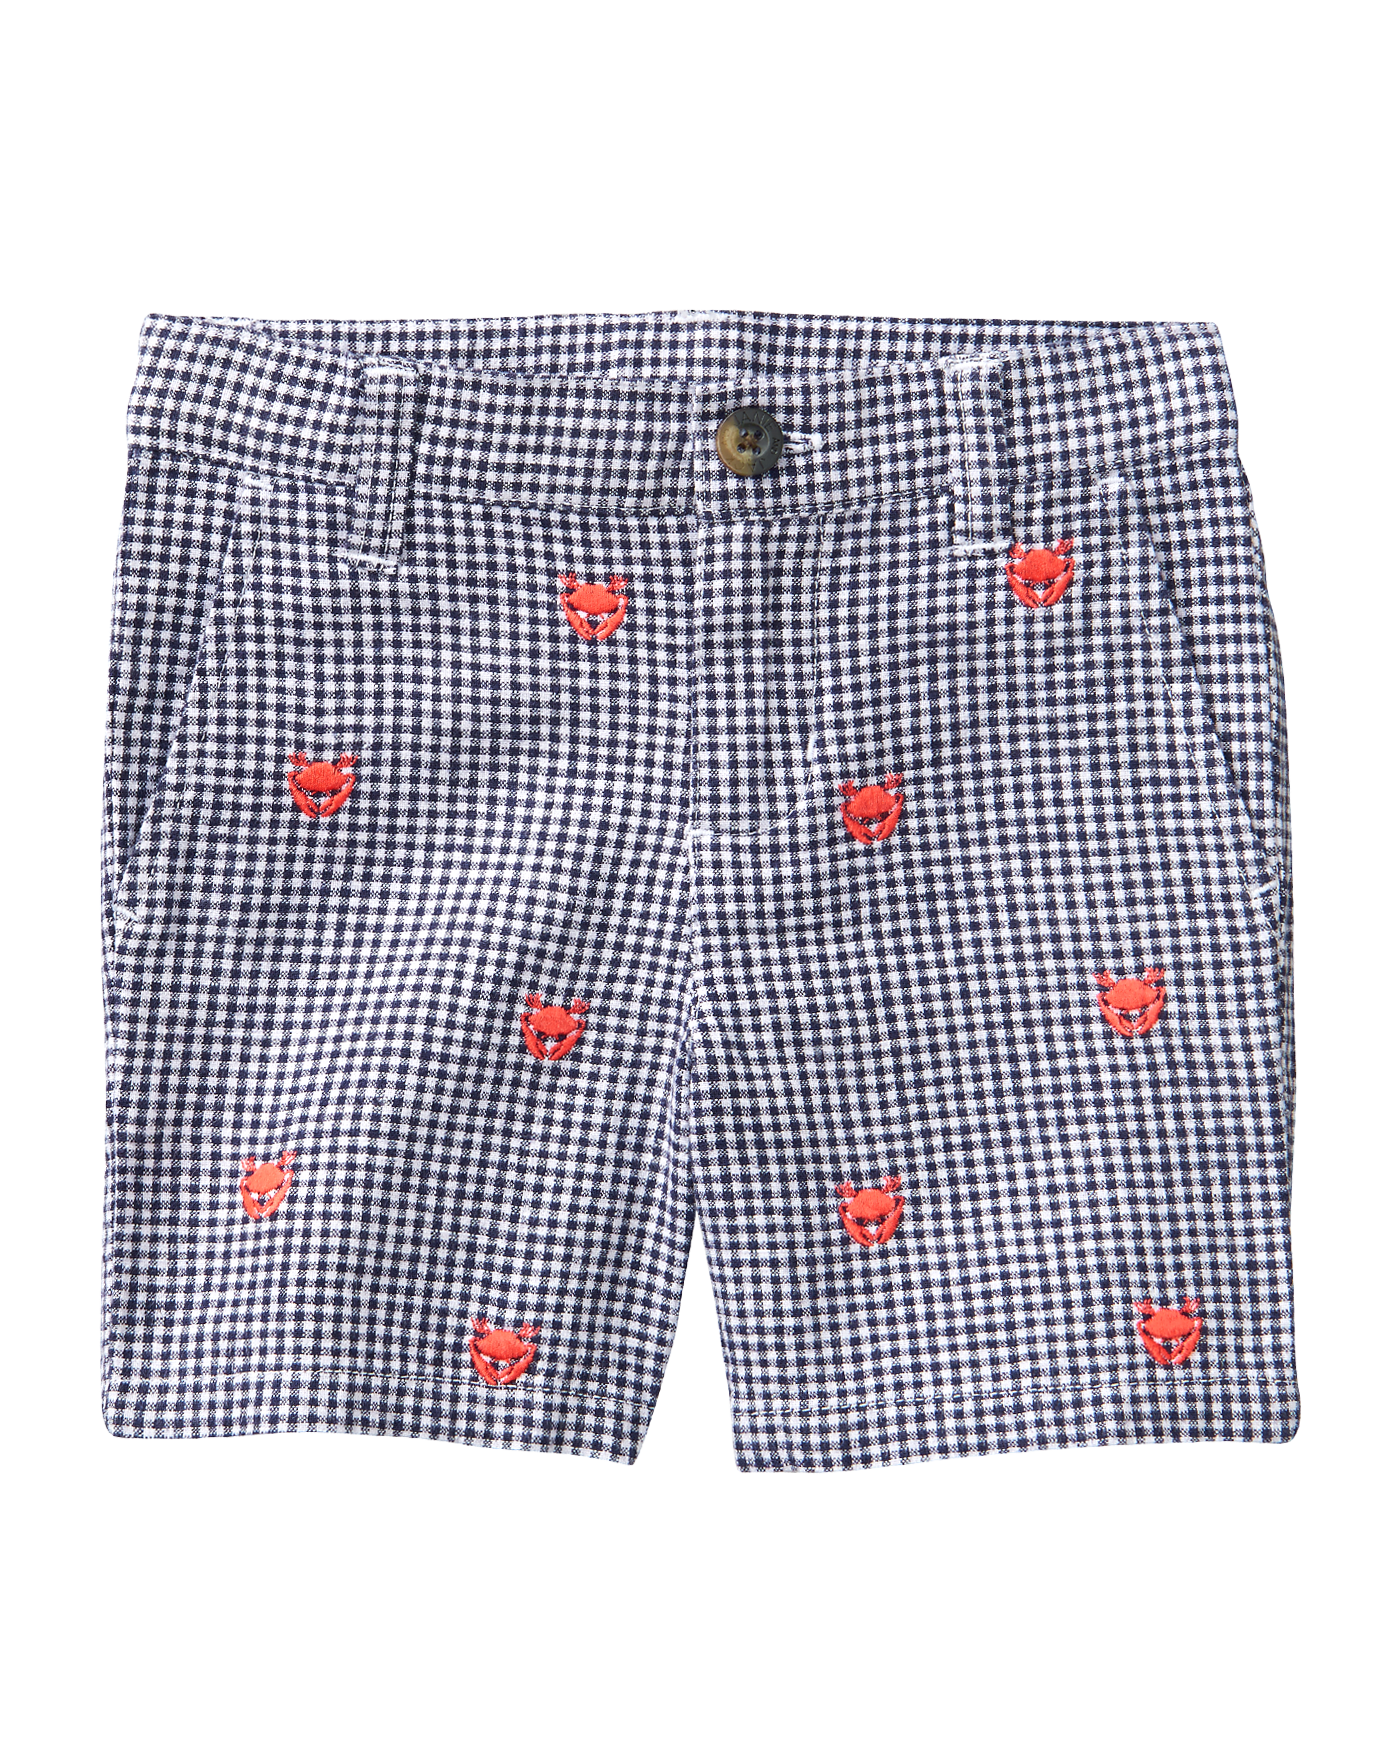 Embroidered Gingham Short 